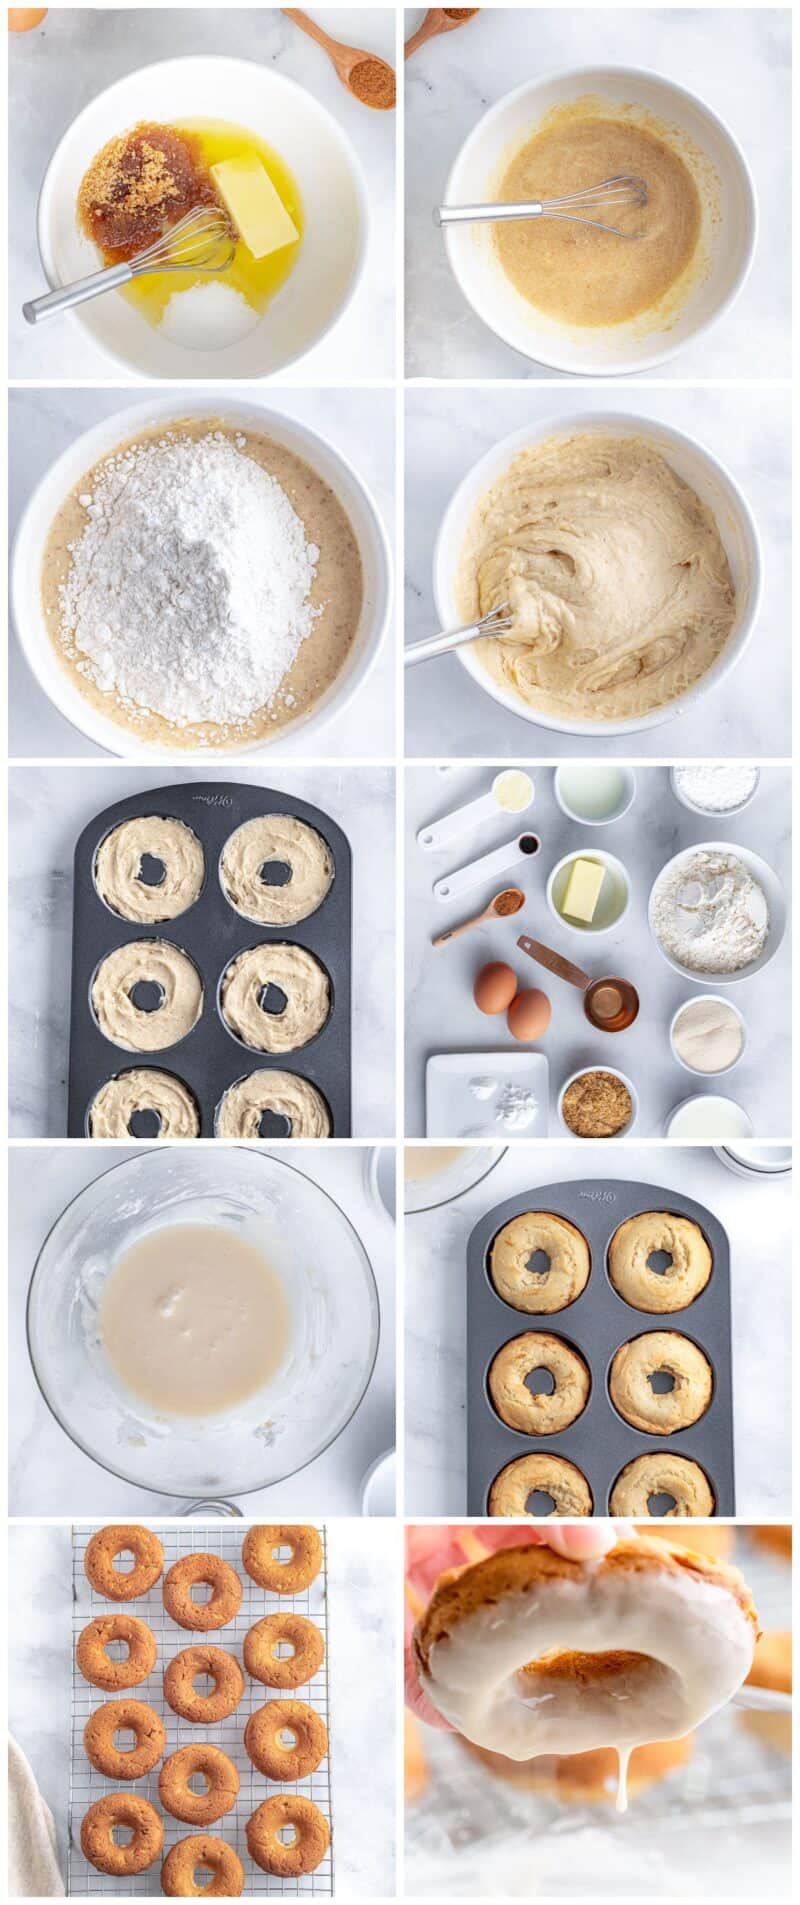 step by step photos for how to make glazed baked donuts